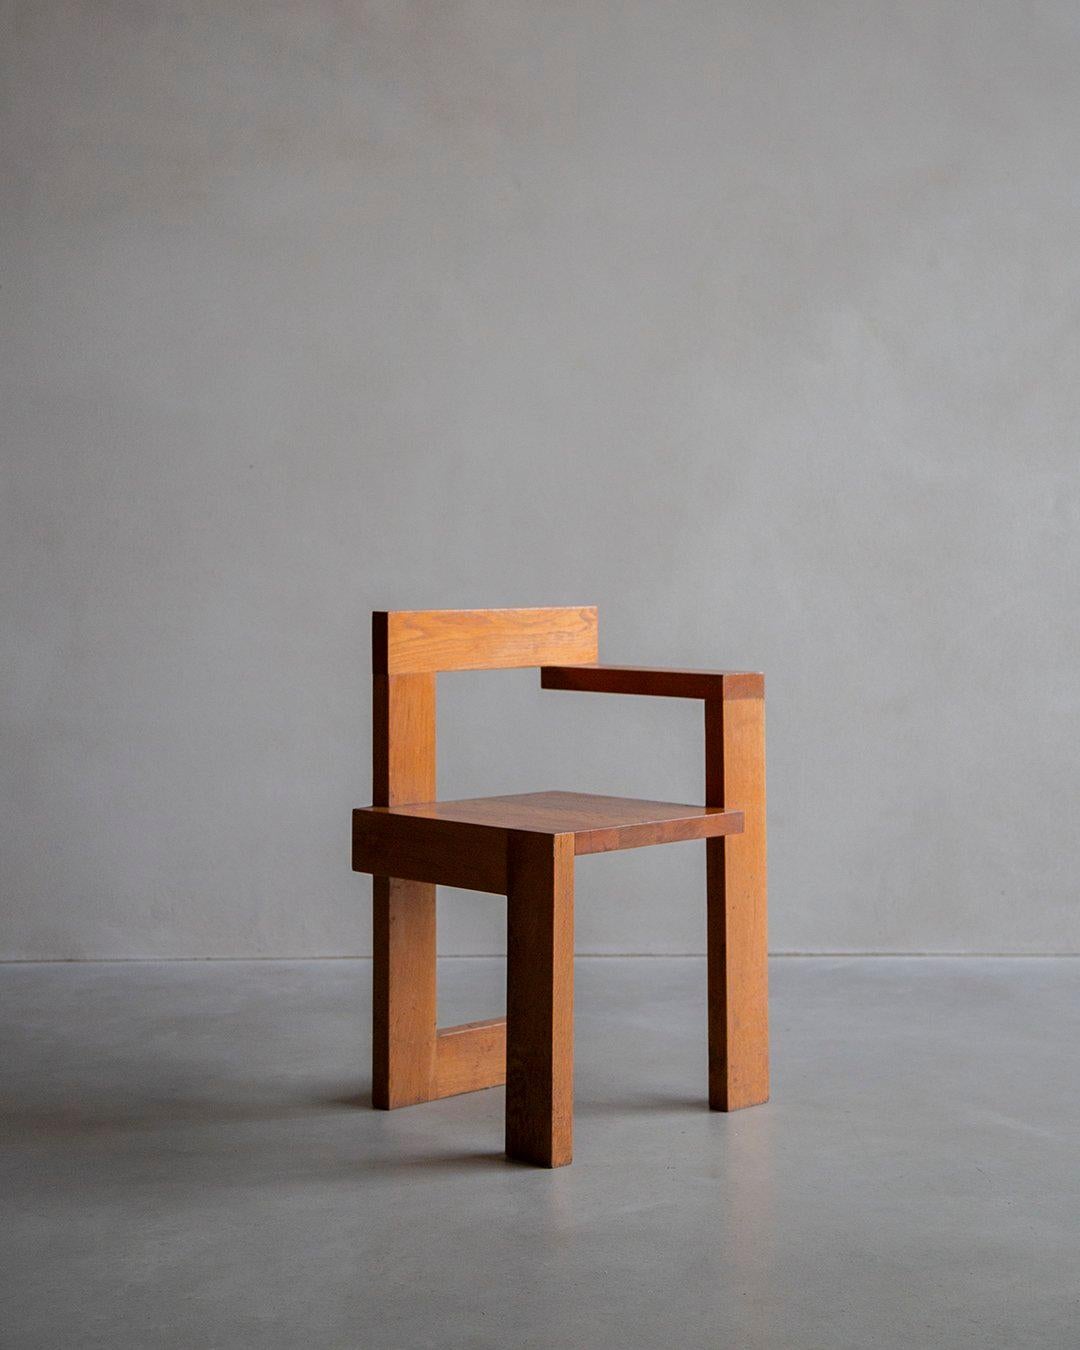 This 1970s Dutch interpretation of the Steltman chair pays tribute to Rietveld's vision. Crafted from solid oak, it features a very nice natural wood grain, signifying both beauty and strength. Embedded in history, this chair was integral to